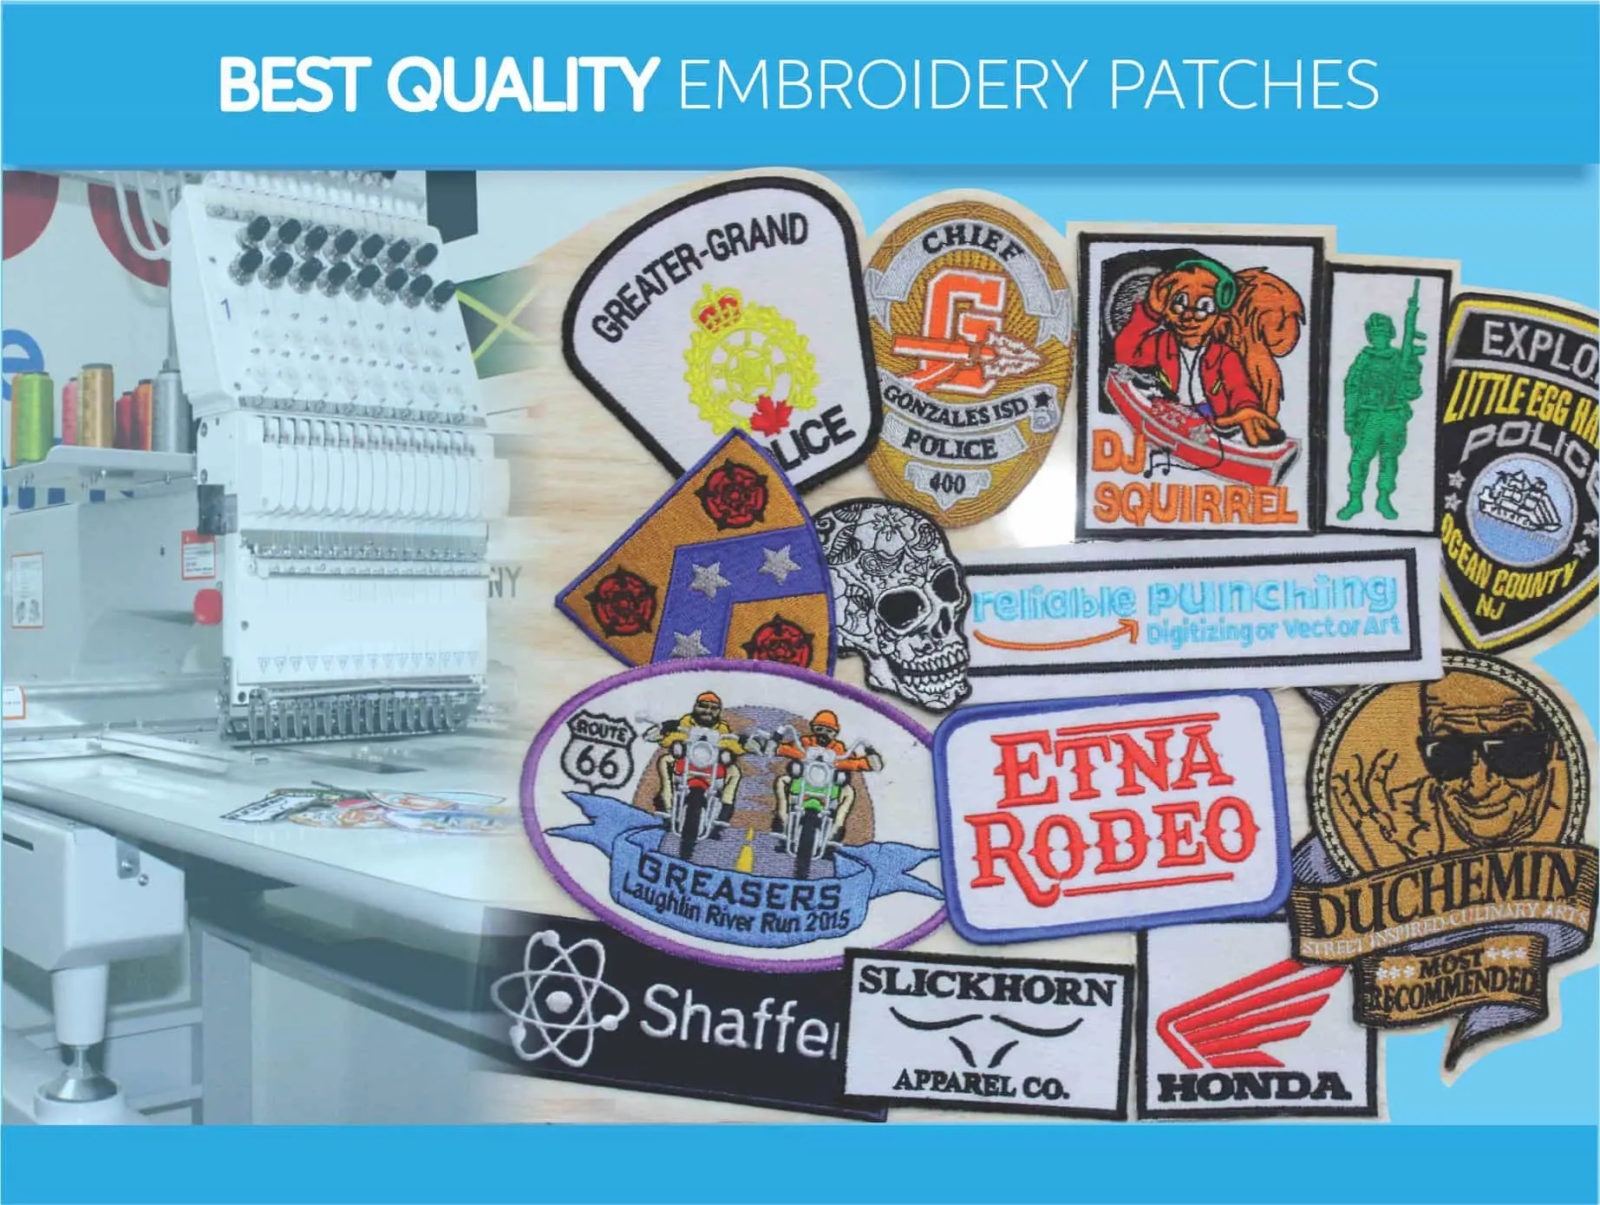 What Are The Different Types Of Embroidery Patches?